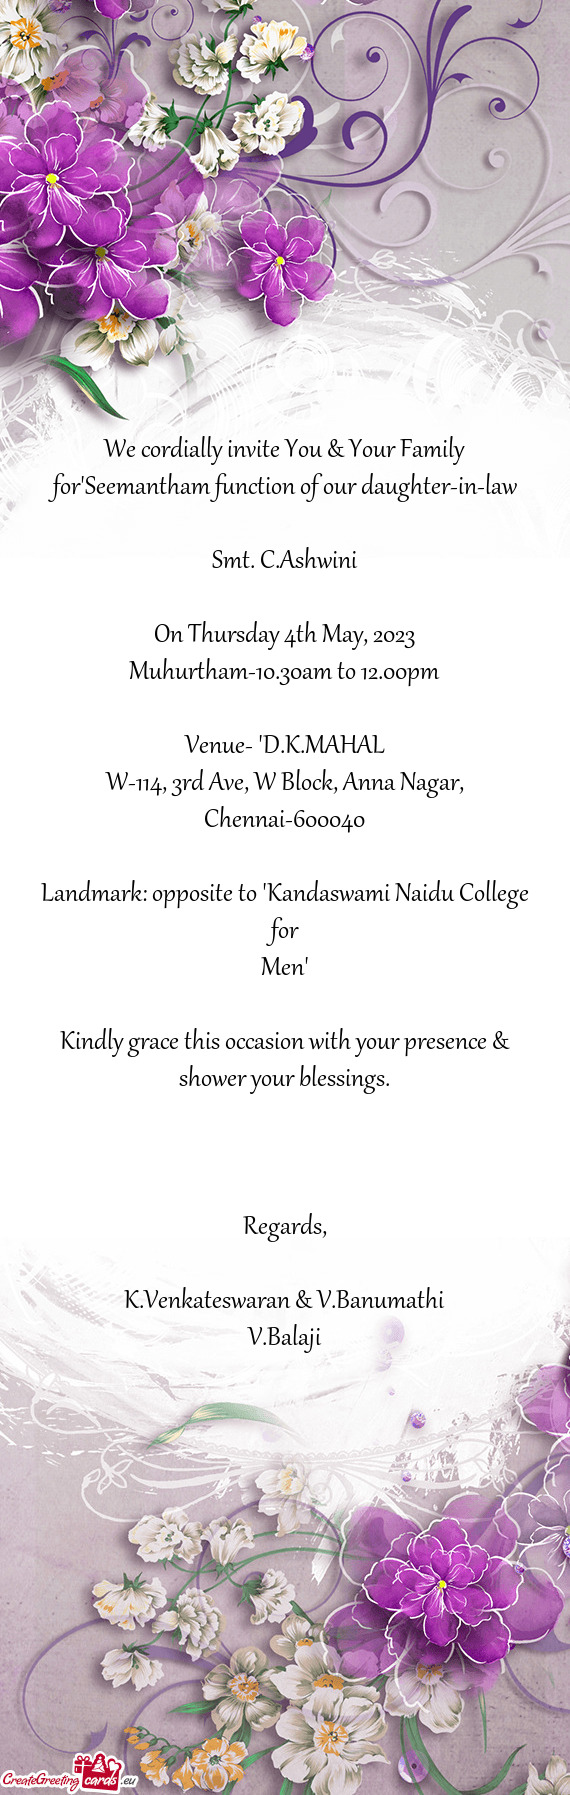 We cordially invite You & Your Family for"Seemantham function of our daughter-in-law